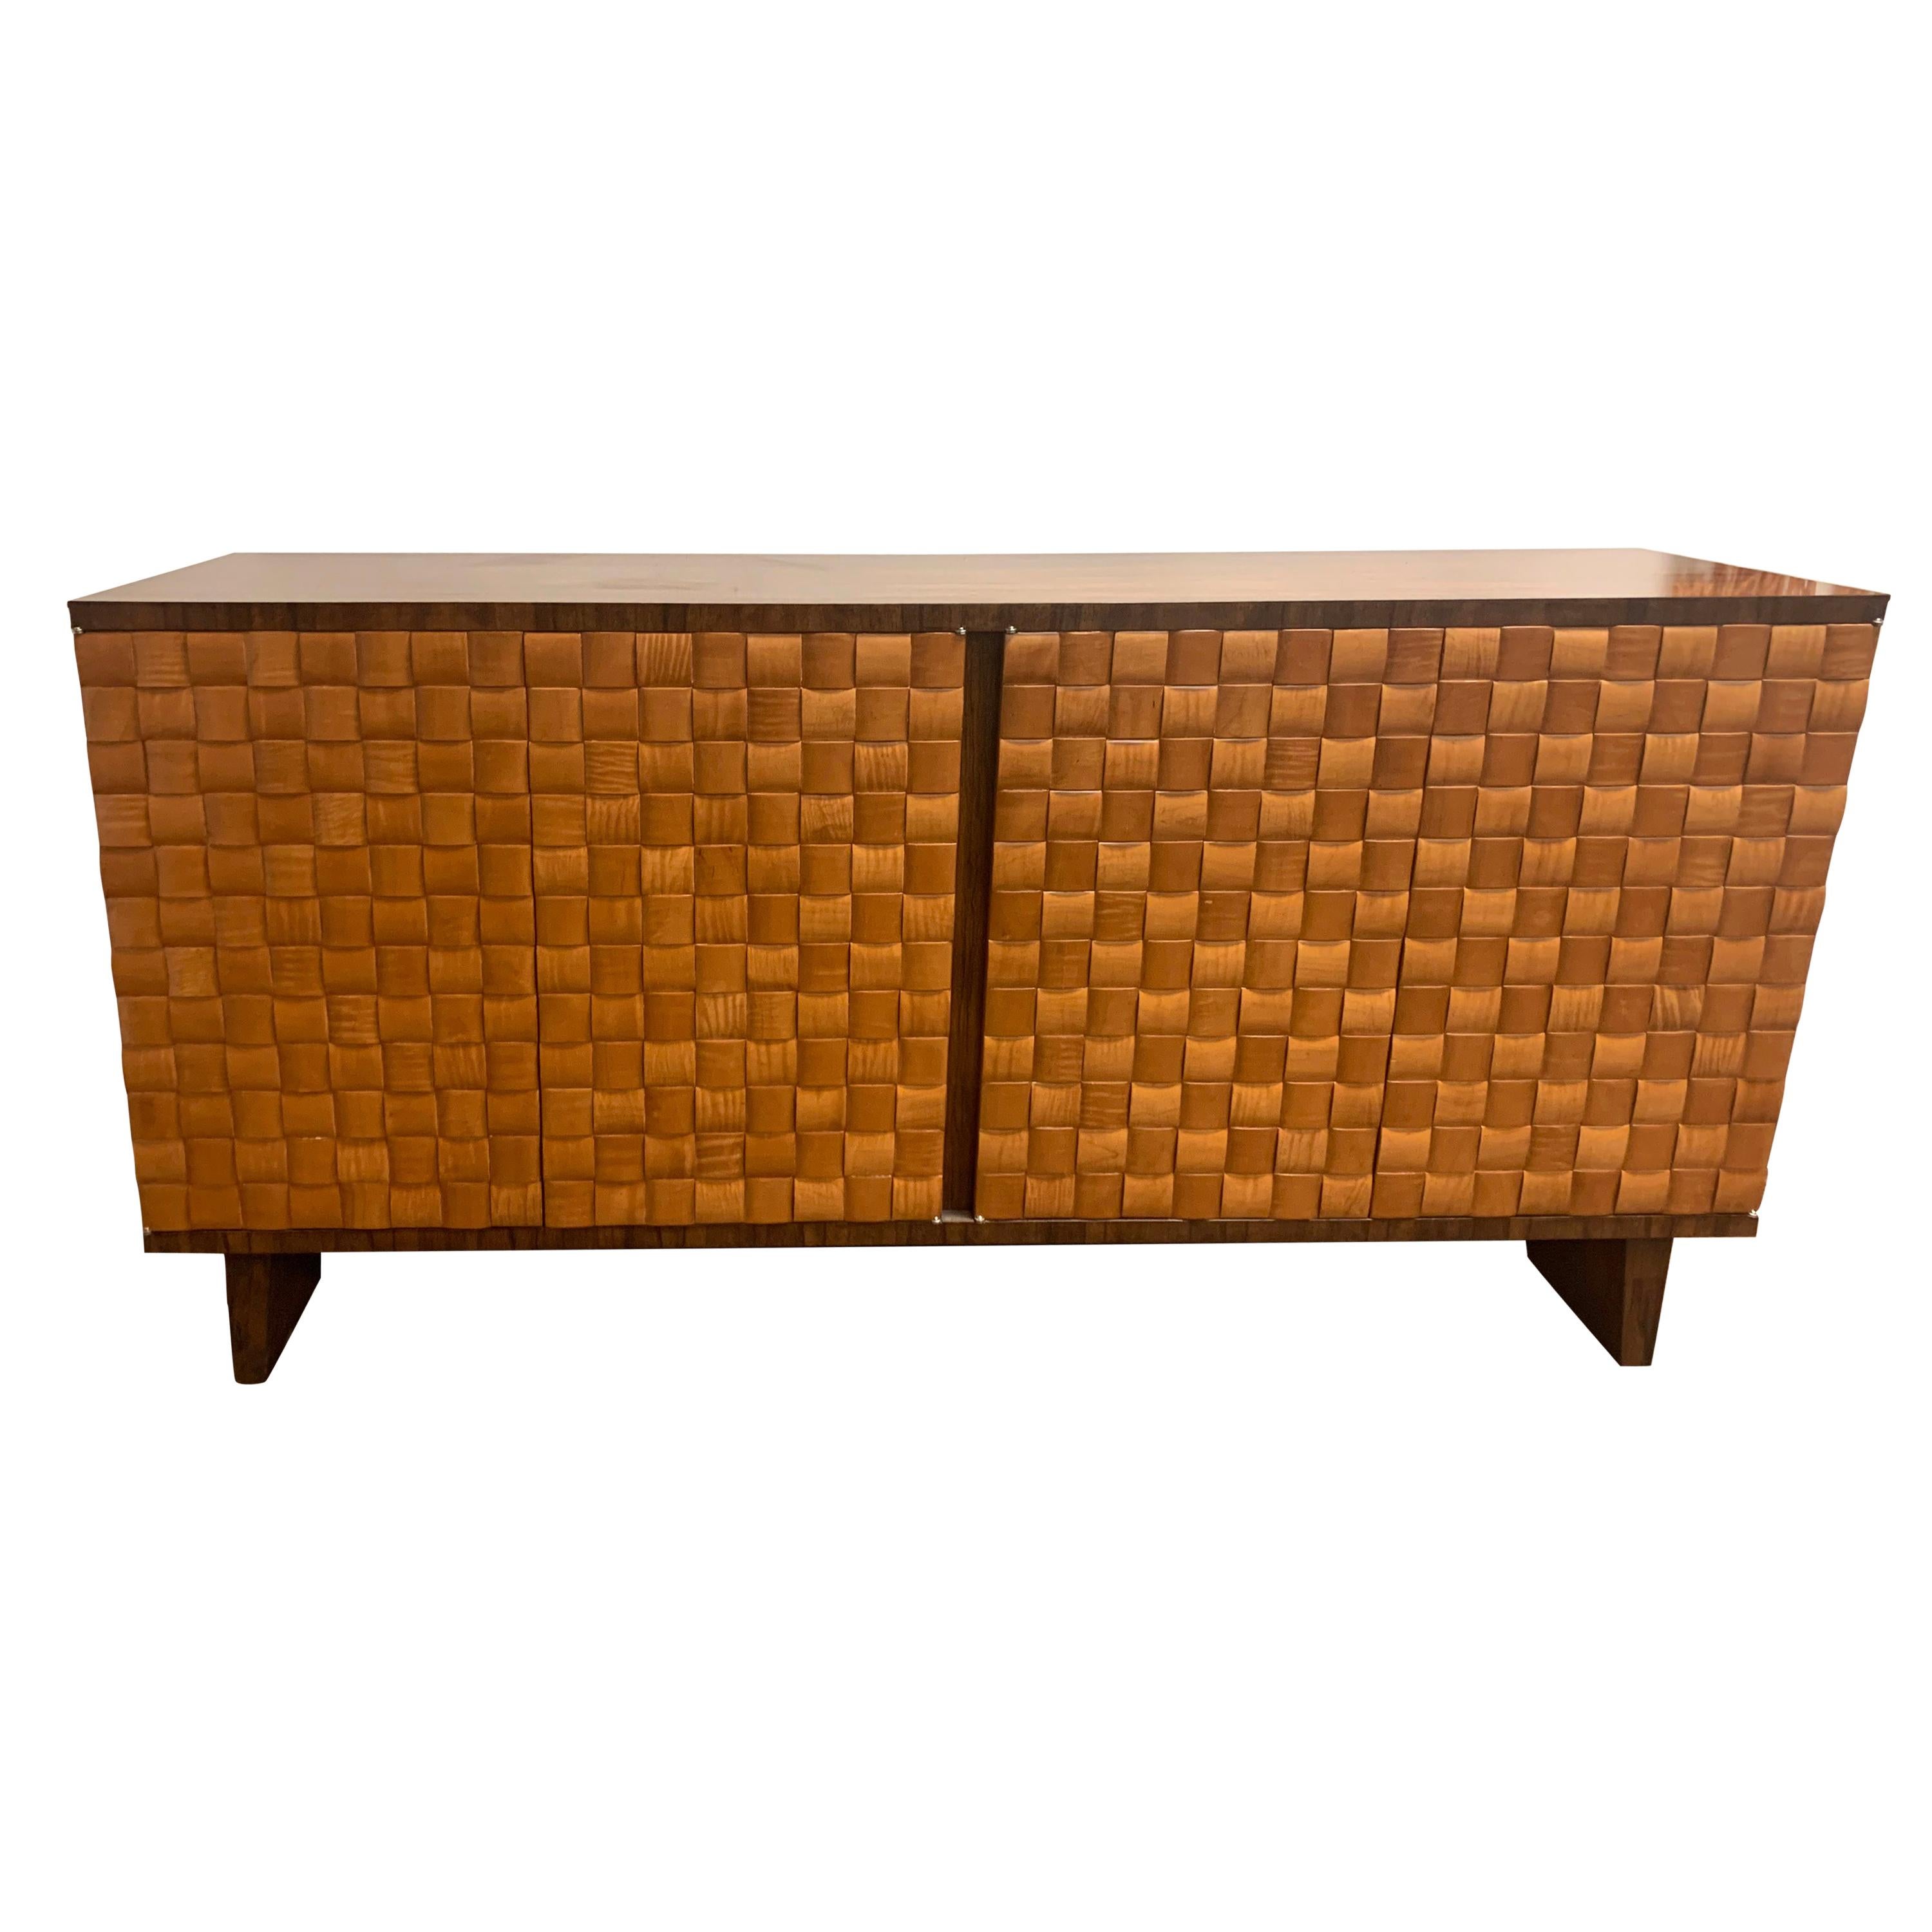 Contemporary Modernist Theodore Alexander Weave Front & Wood Credenza 2000s